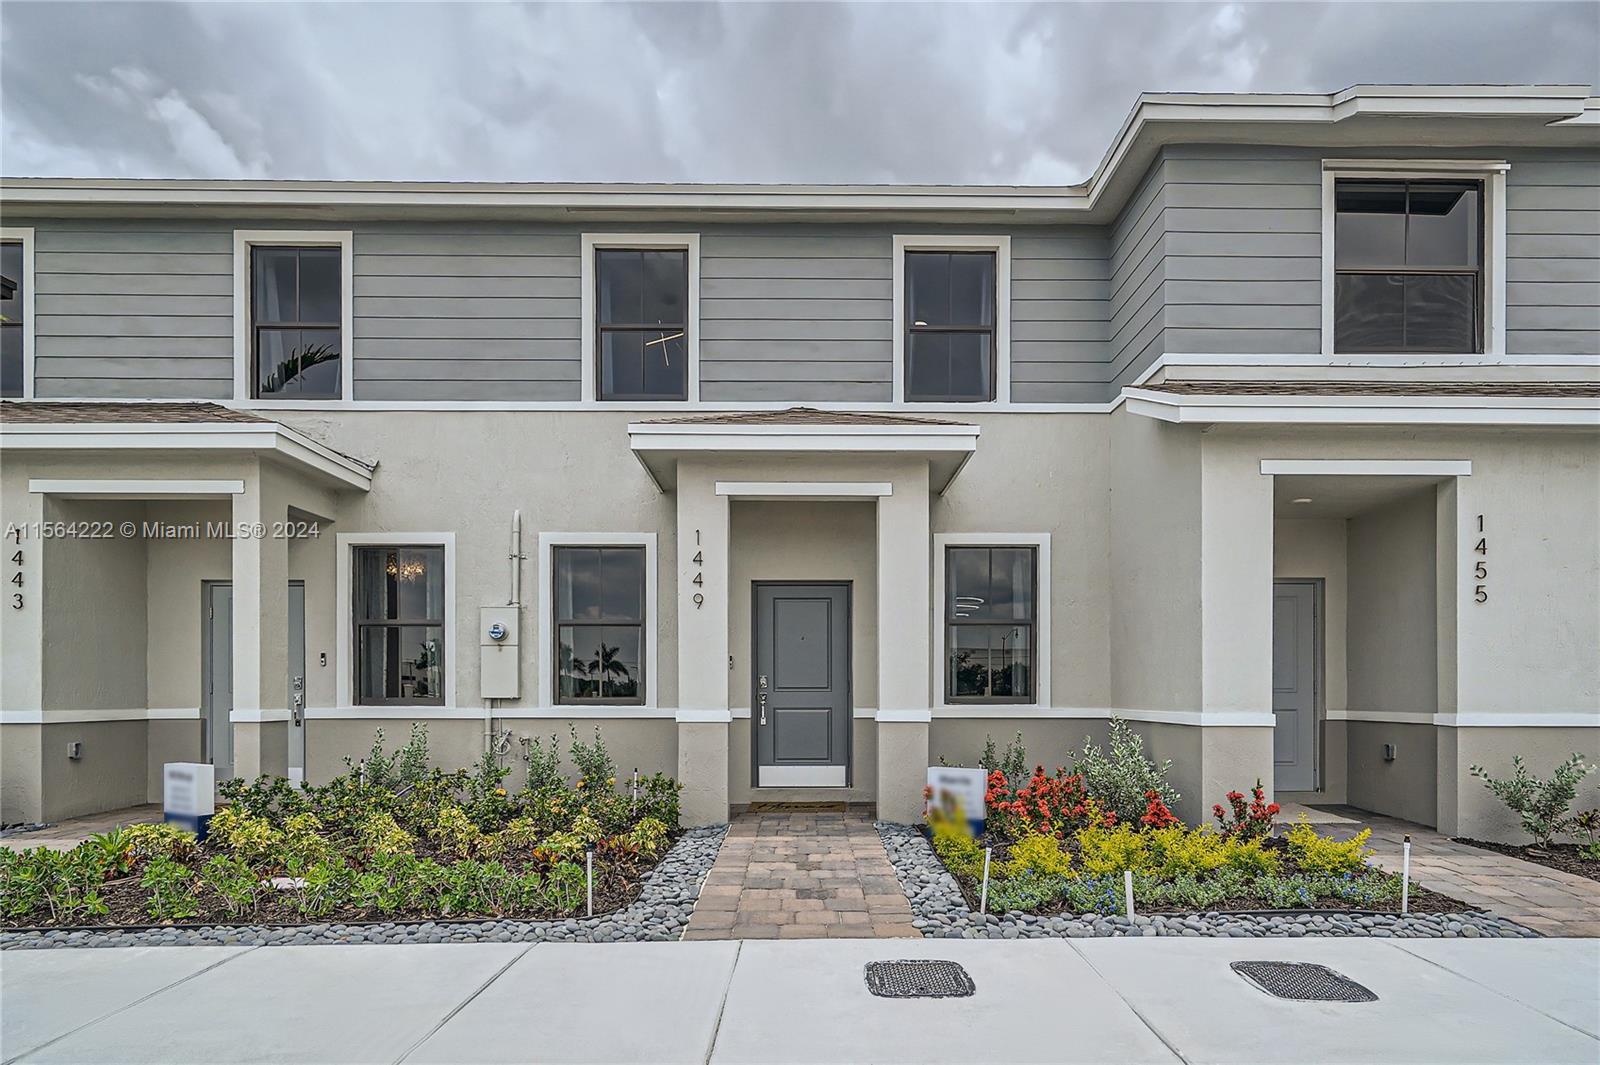 Spacious new construction townhome! Open floorplan with 3 beds and 2.5 baths. Fenced-in backyard. Stainless steel appliances. Laundry room inside home. Community amenities include a cabana, pool, dog park, tot lot, walking area around lake w/ fitness equipment, meditation & yoga area. Close to Florida Keys Outlet Marketplace, Florida’s Turnpike, Farmers Markets, Restaurants, and the Florida Keys! BRAND NEW HOME! CALL FOR A TOUR AND MOVE IN SPECIALS - Restrictions may apply* Pictures, photographs, features, colors and sizes are approximate for illustrations purposes only and will vary from the homes as built. These are not of the actual home but are similar to the home being built.